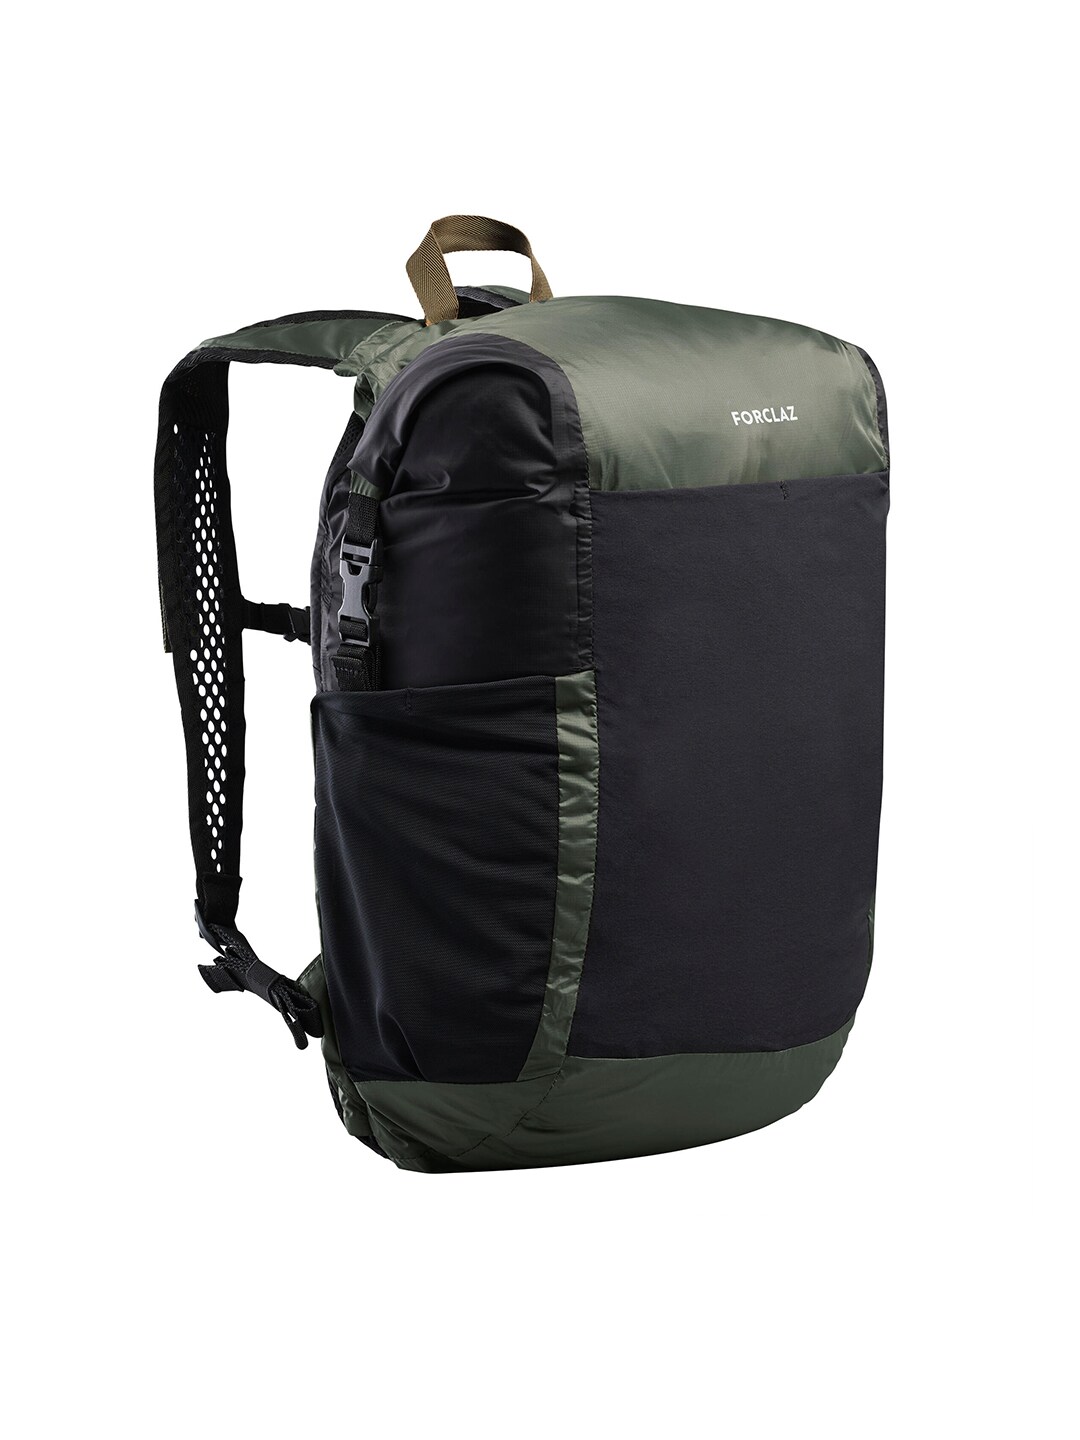 FORCLAZ By Decathlon Unisex Green & Black Travel Backpack With Rain Cover Price in India